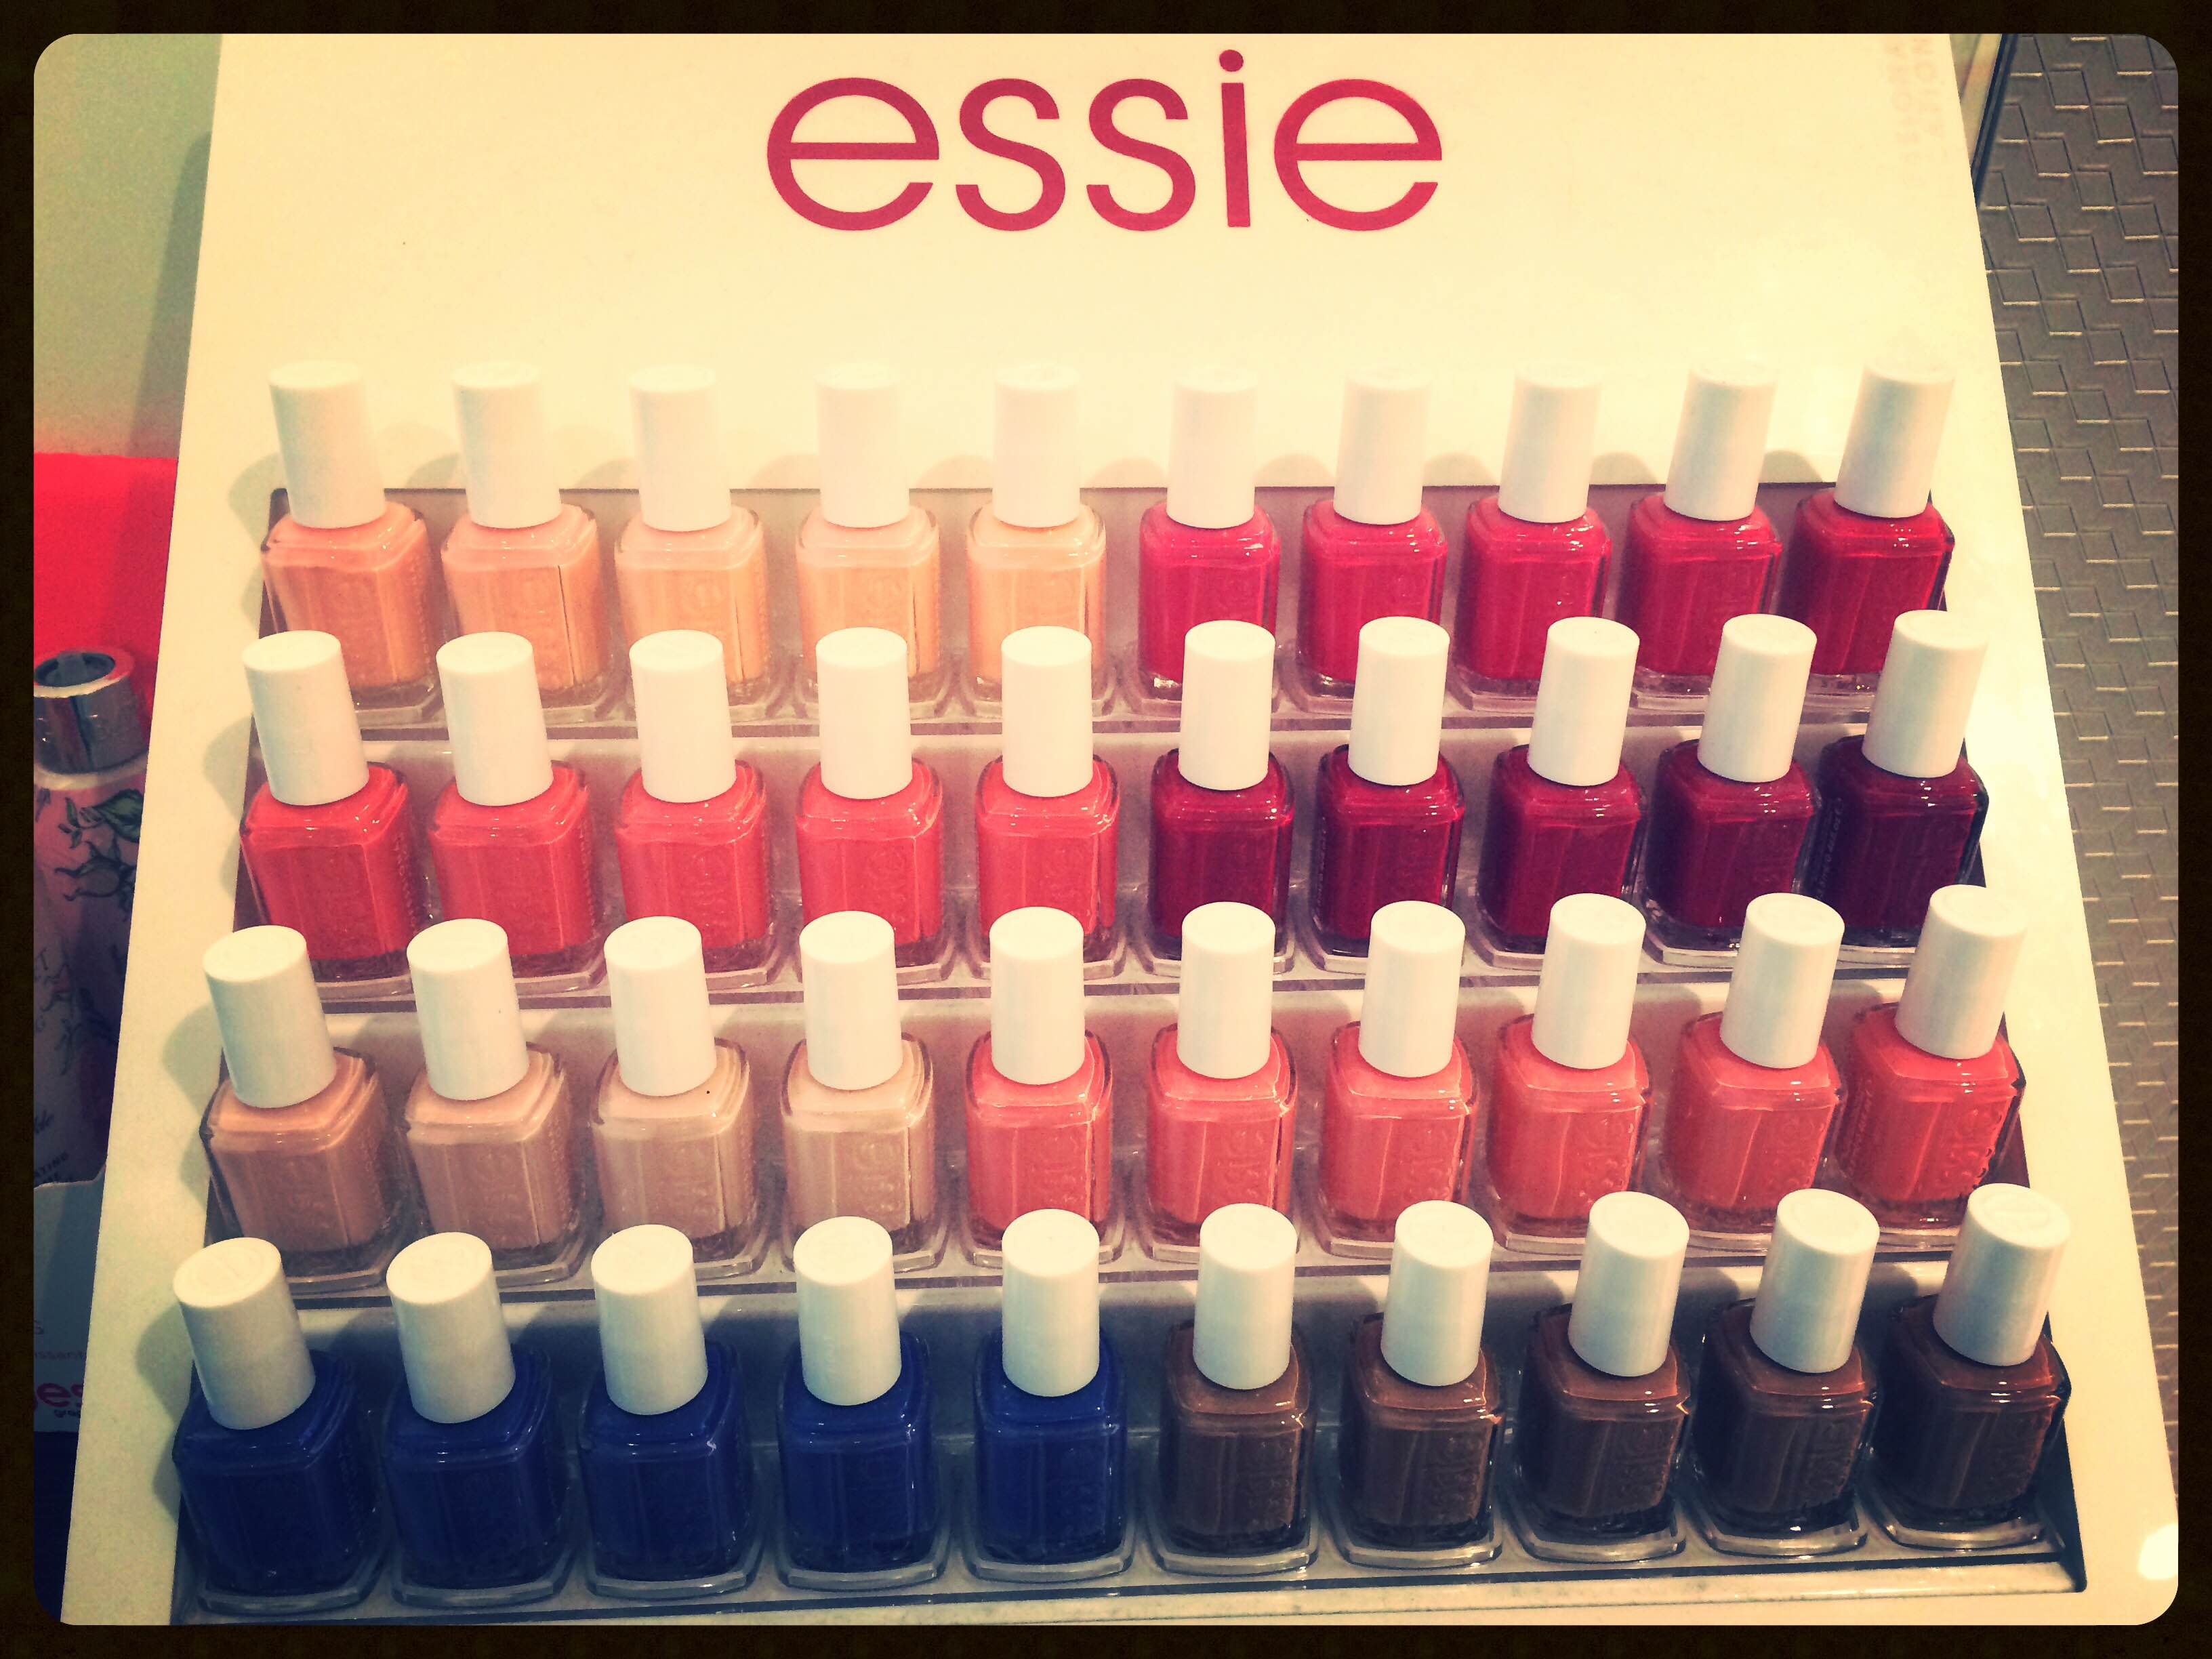 Beautiful Nails By Essie Swatch I M Feeling Good